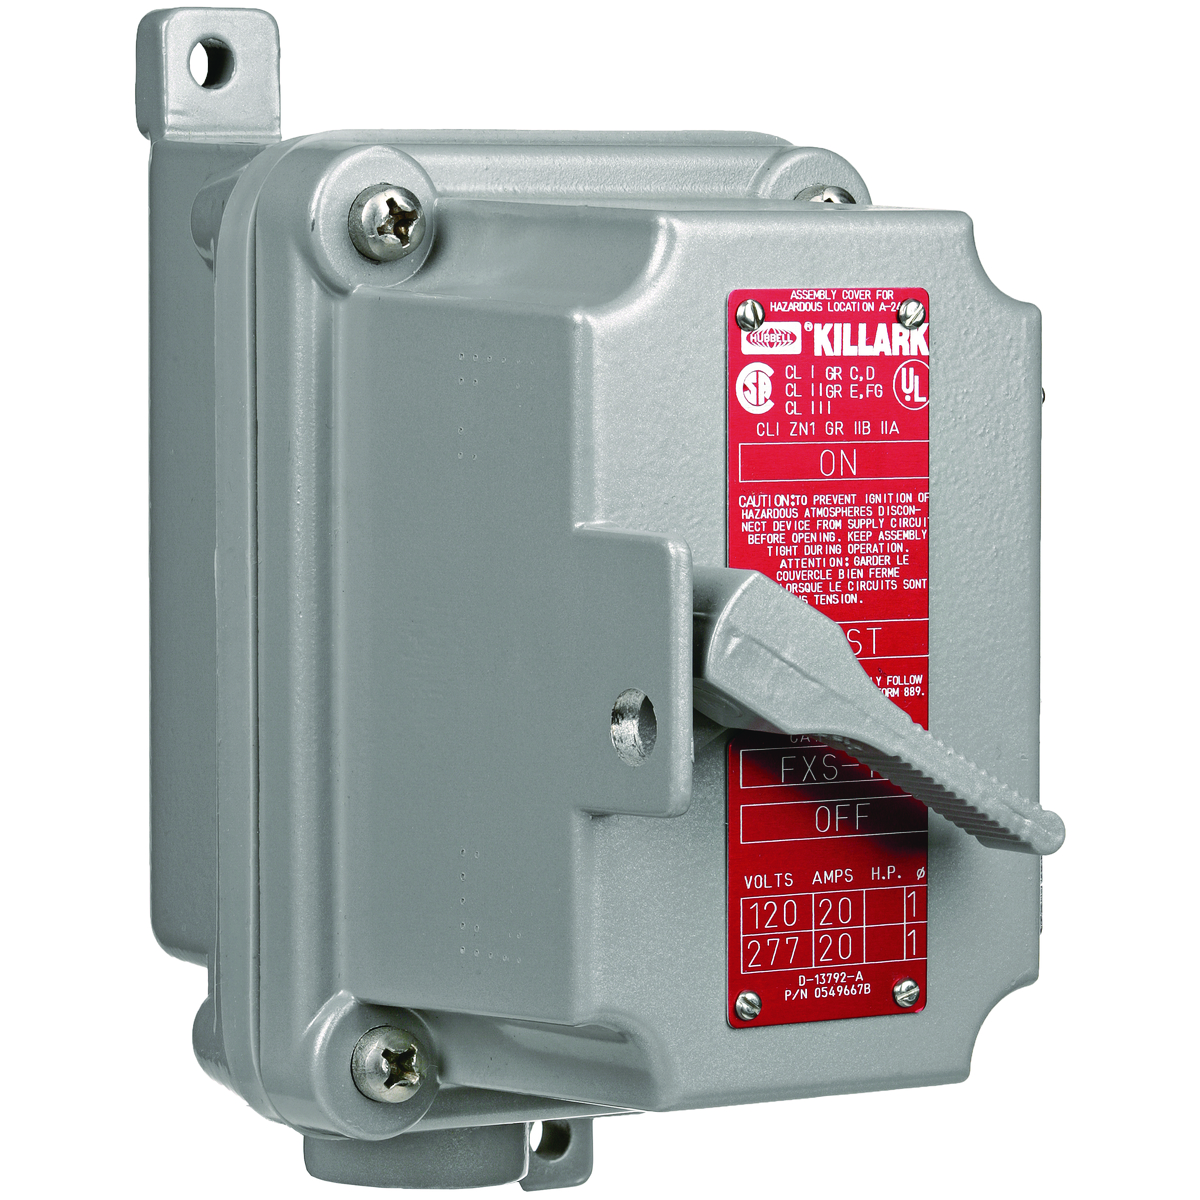 FXSX SERIES - ALUMINUM DEAD-END SINGLE GANG 2-POLE, SINGLE PHASE MANUALMOTOR STARTING SWITCH UNIT - WITHOUT OVERLOAD PROTECTION - HUB SIZE 3/4INCH